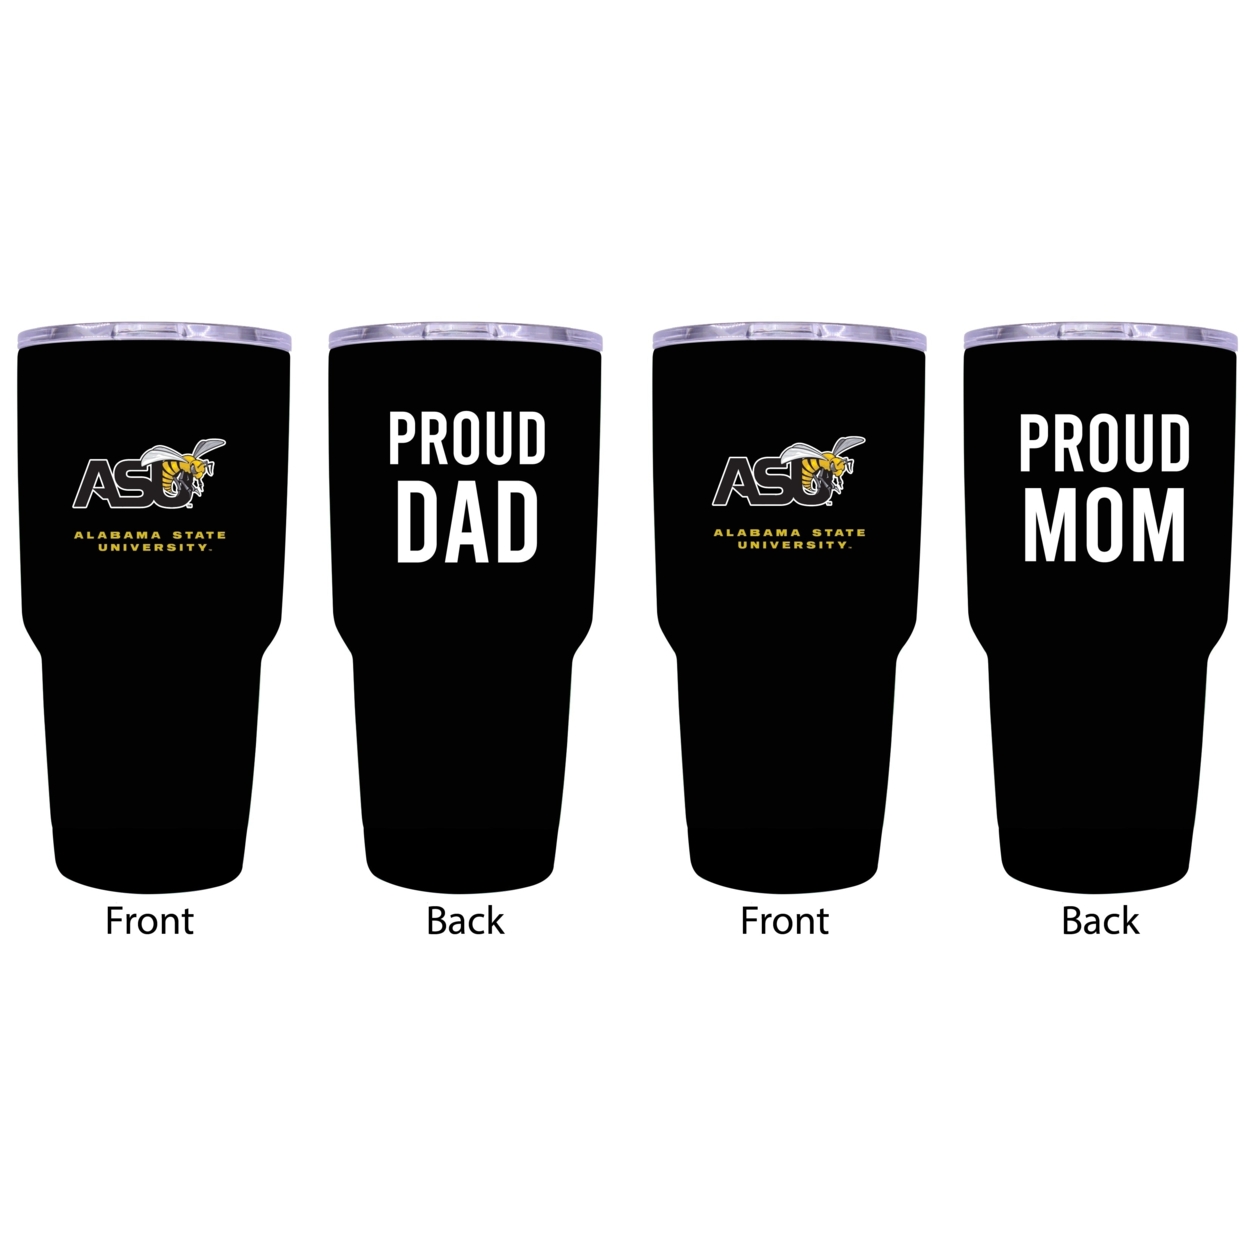 Alabama State University Proud Mom And Dad 24 Oz Insulated Stainless Steel Tumblers 2 Pack Black.